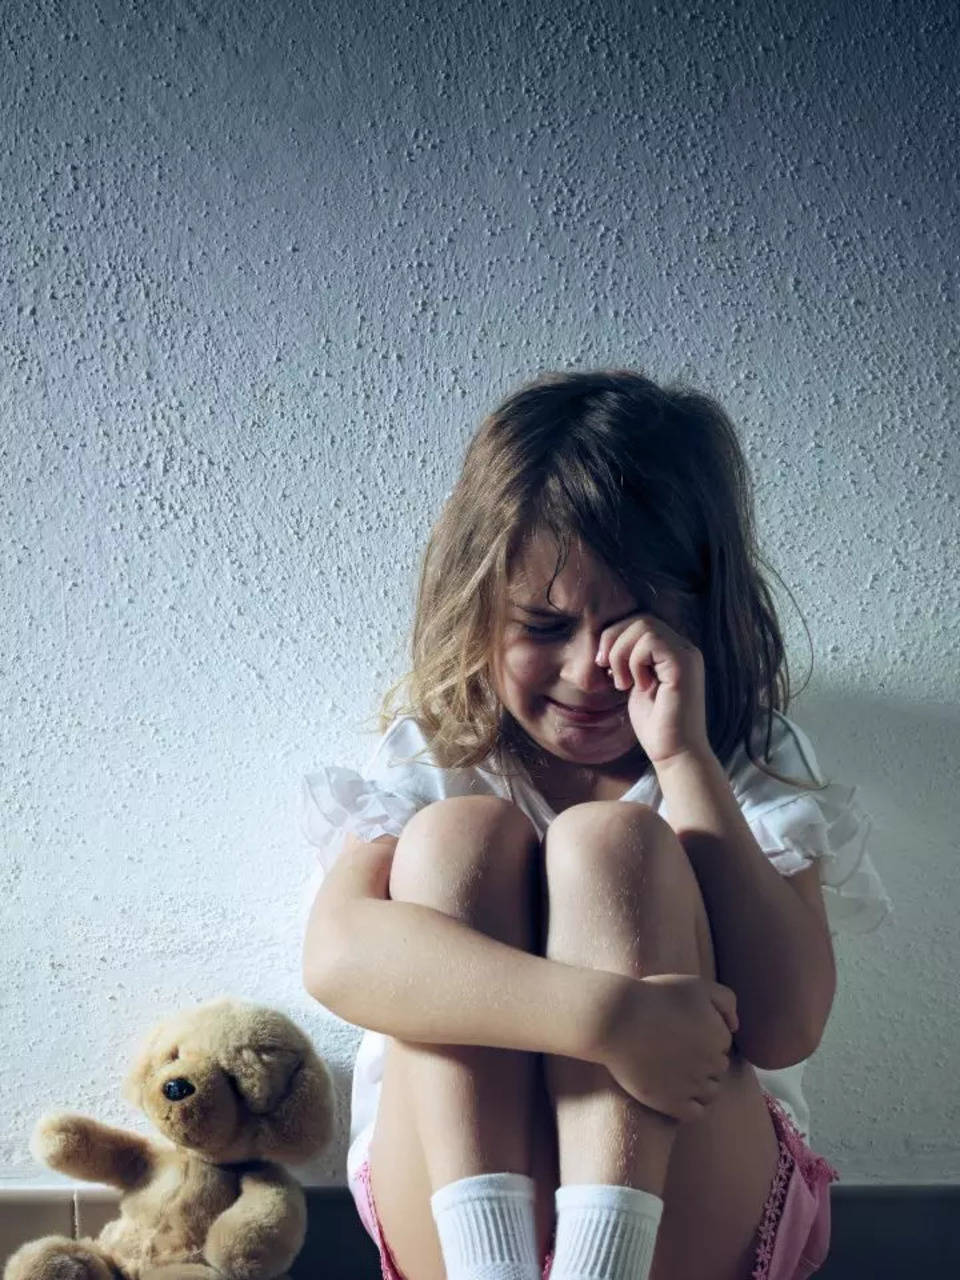 Things your child does NOT want to hear when they're sad | Times ...